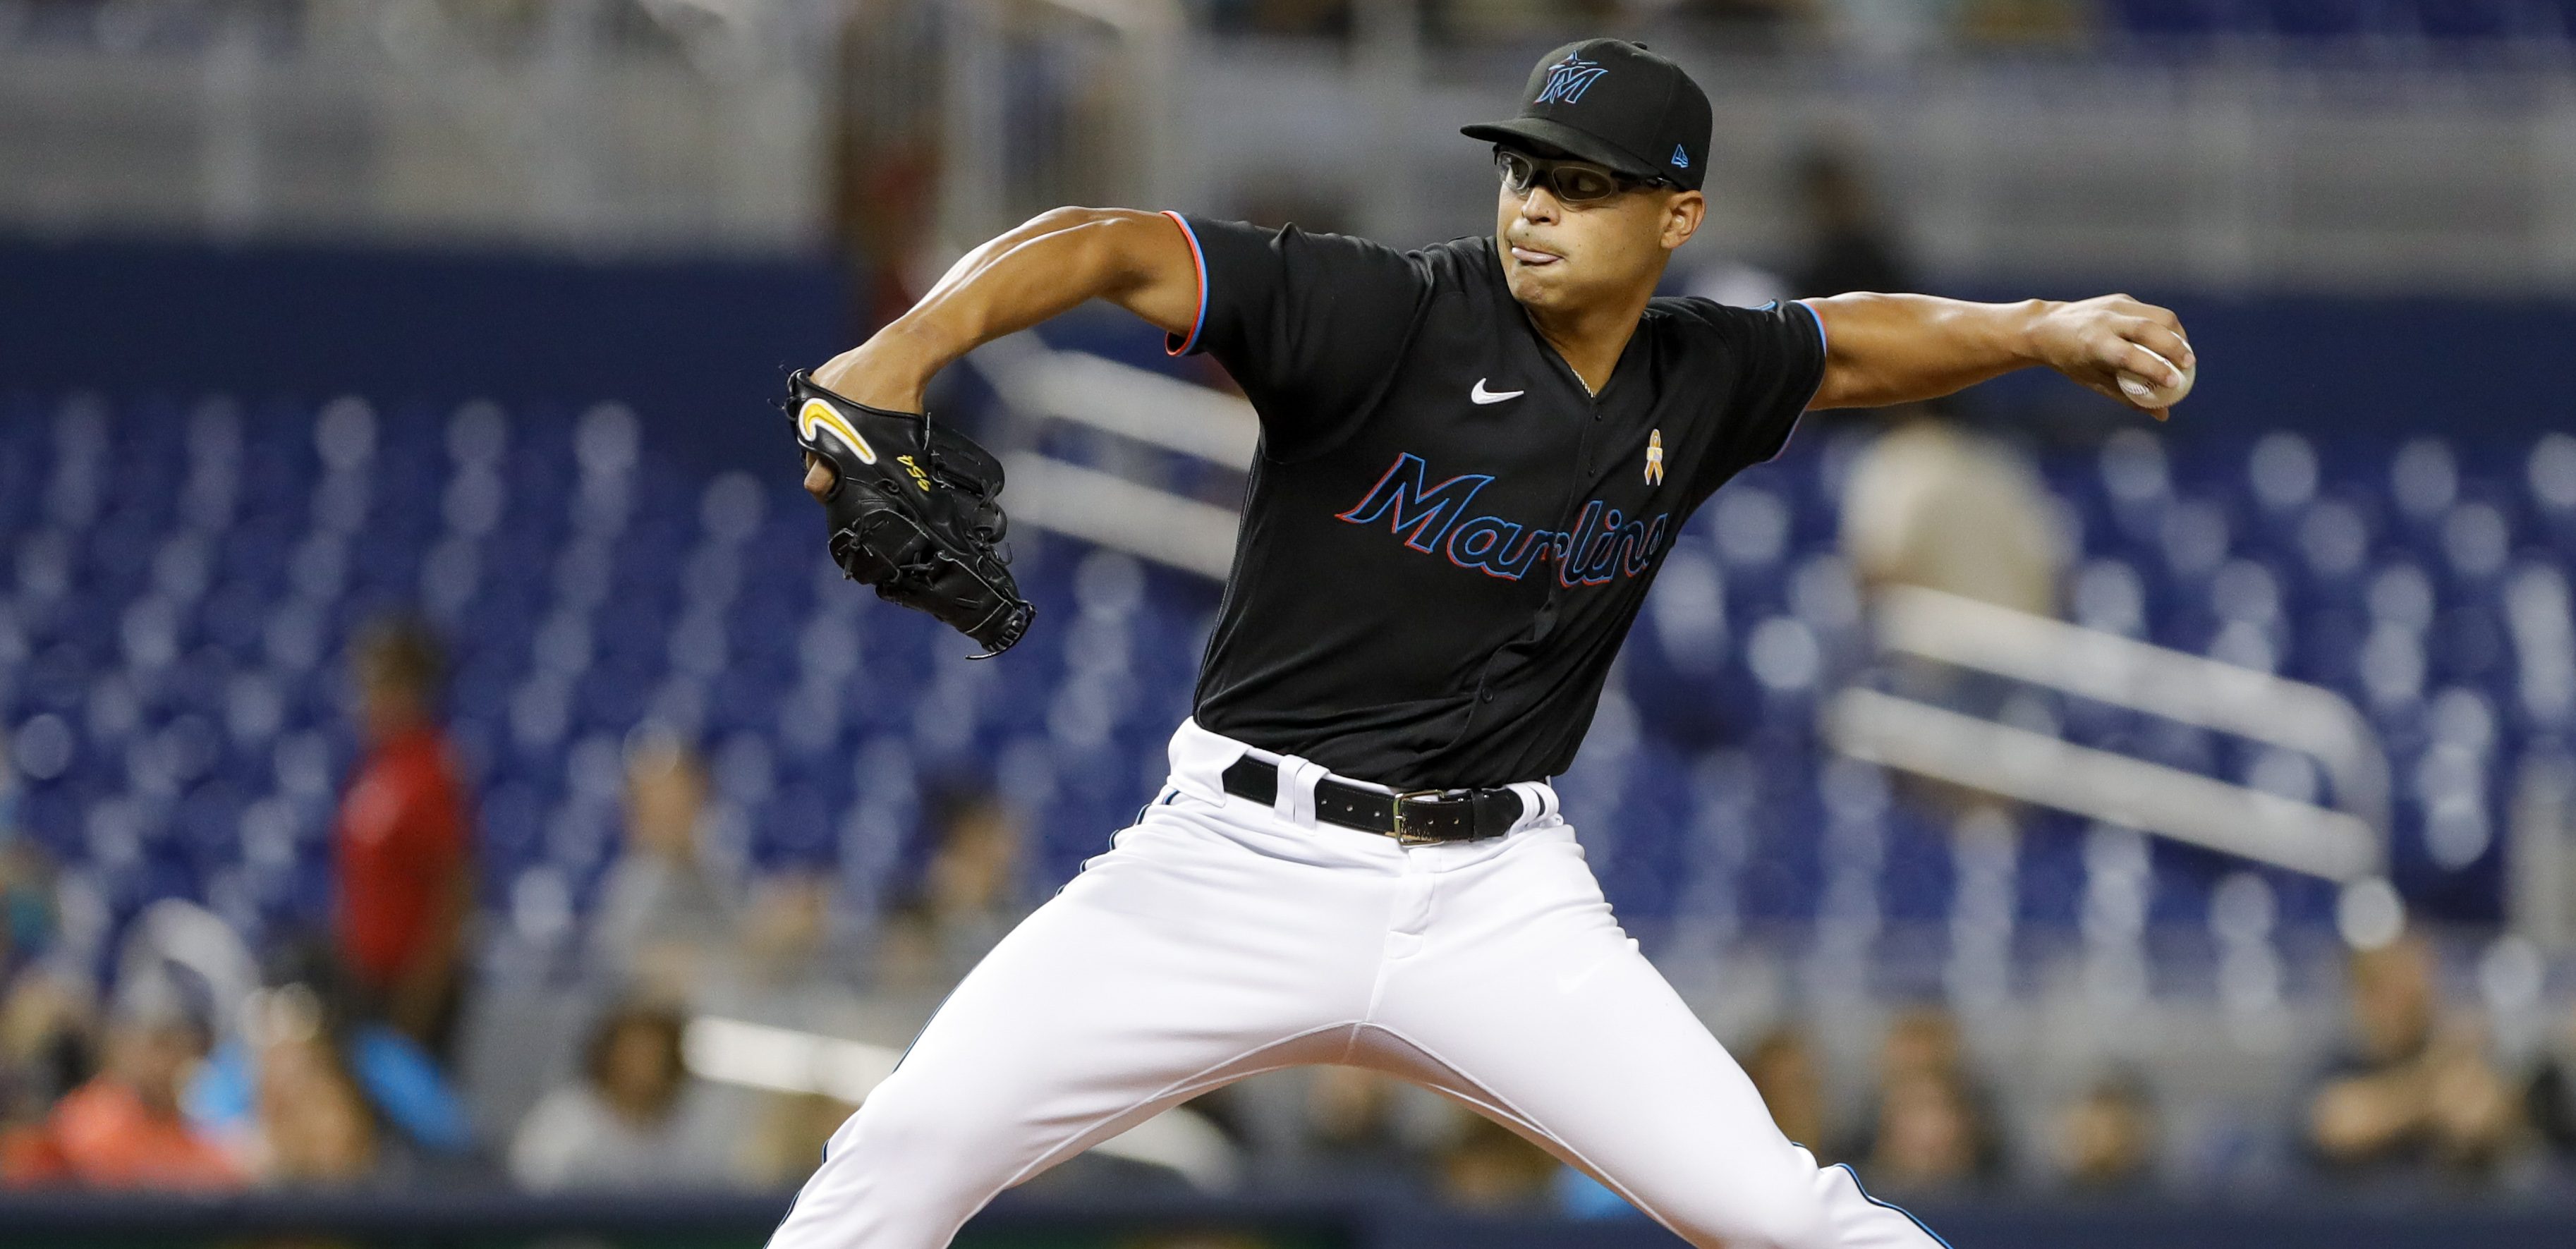 2022 Marlins Season Preview: Trevor Rogers' early success isn't